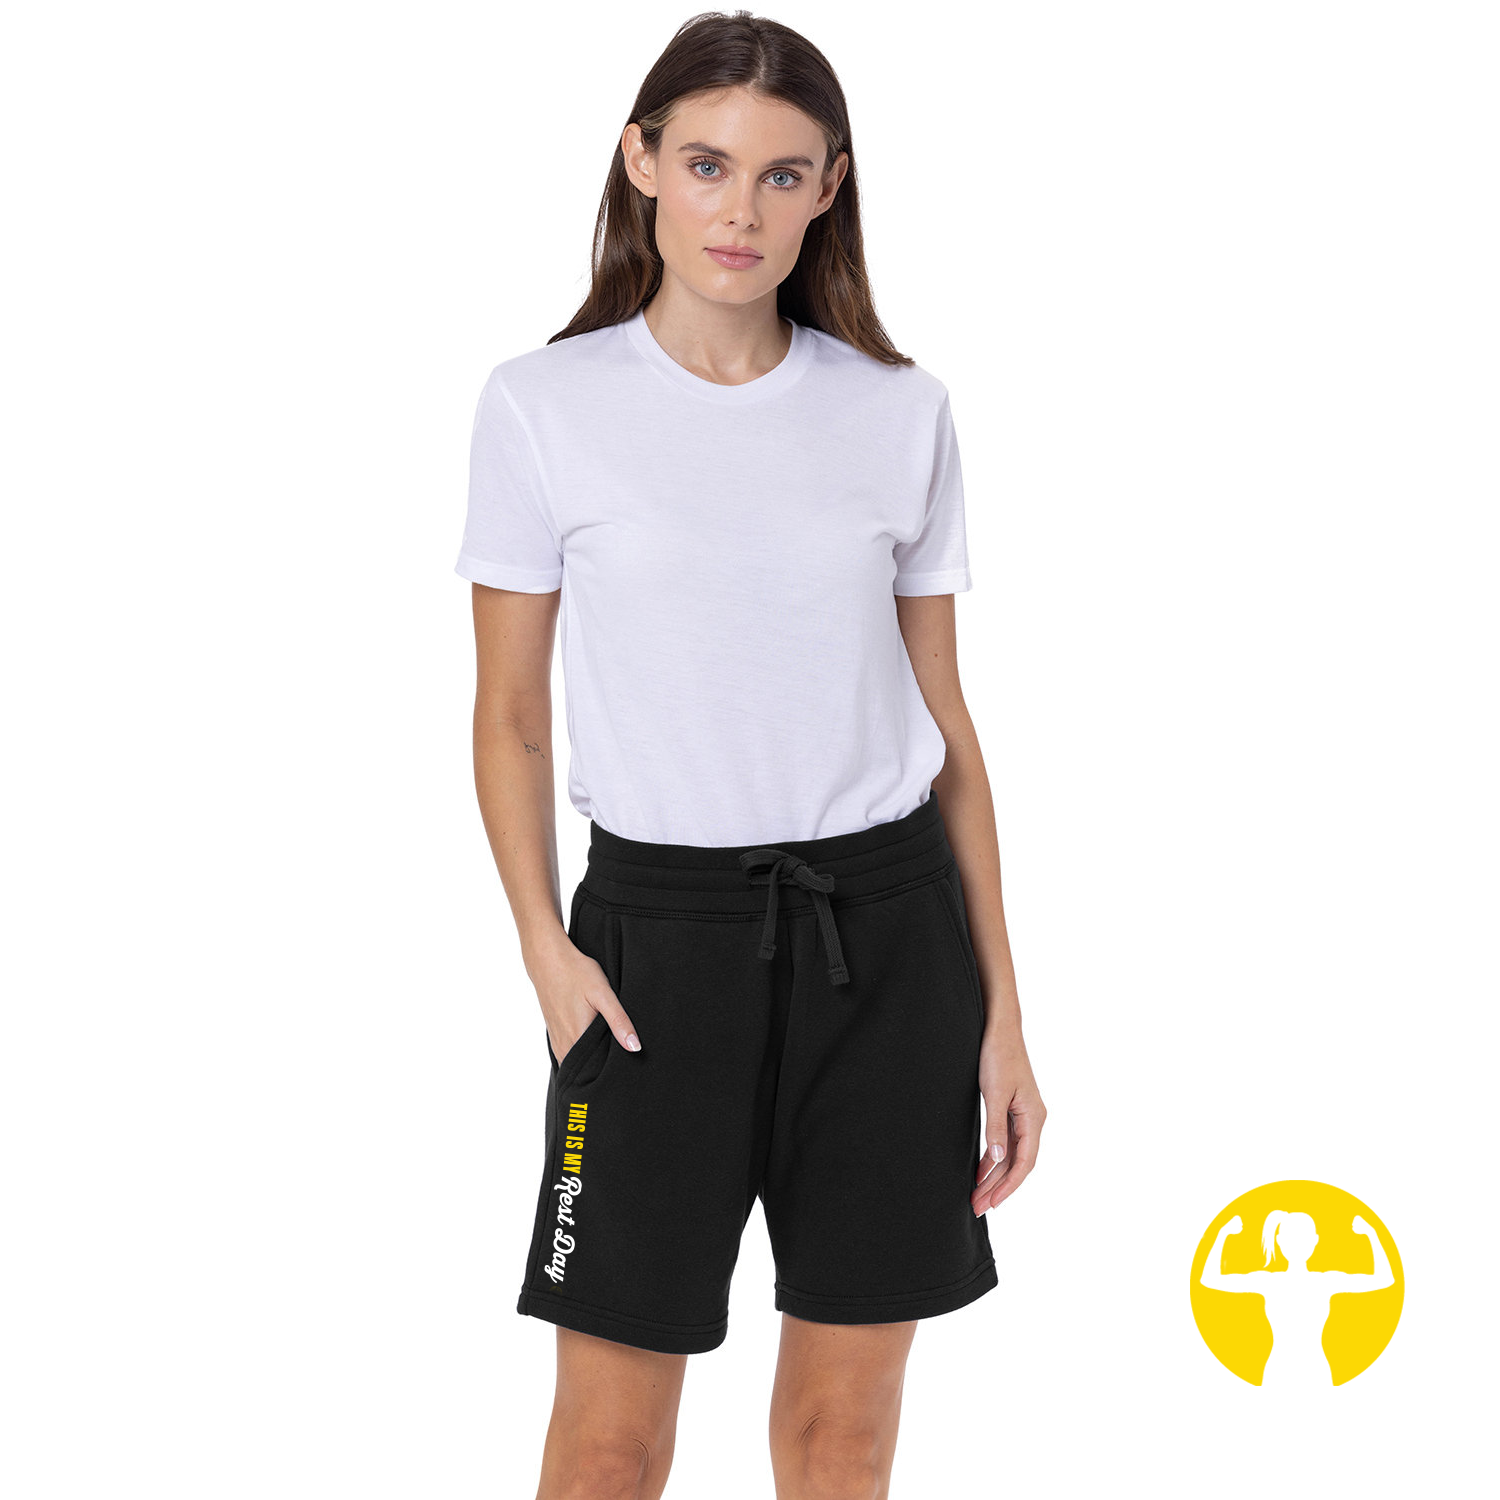 Sweat Shorts - Choose from 5 Graphics